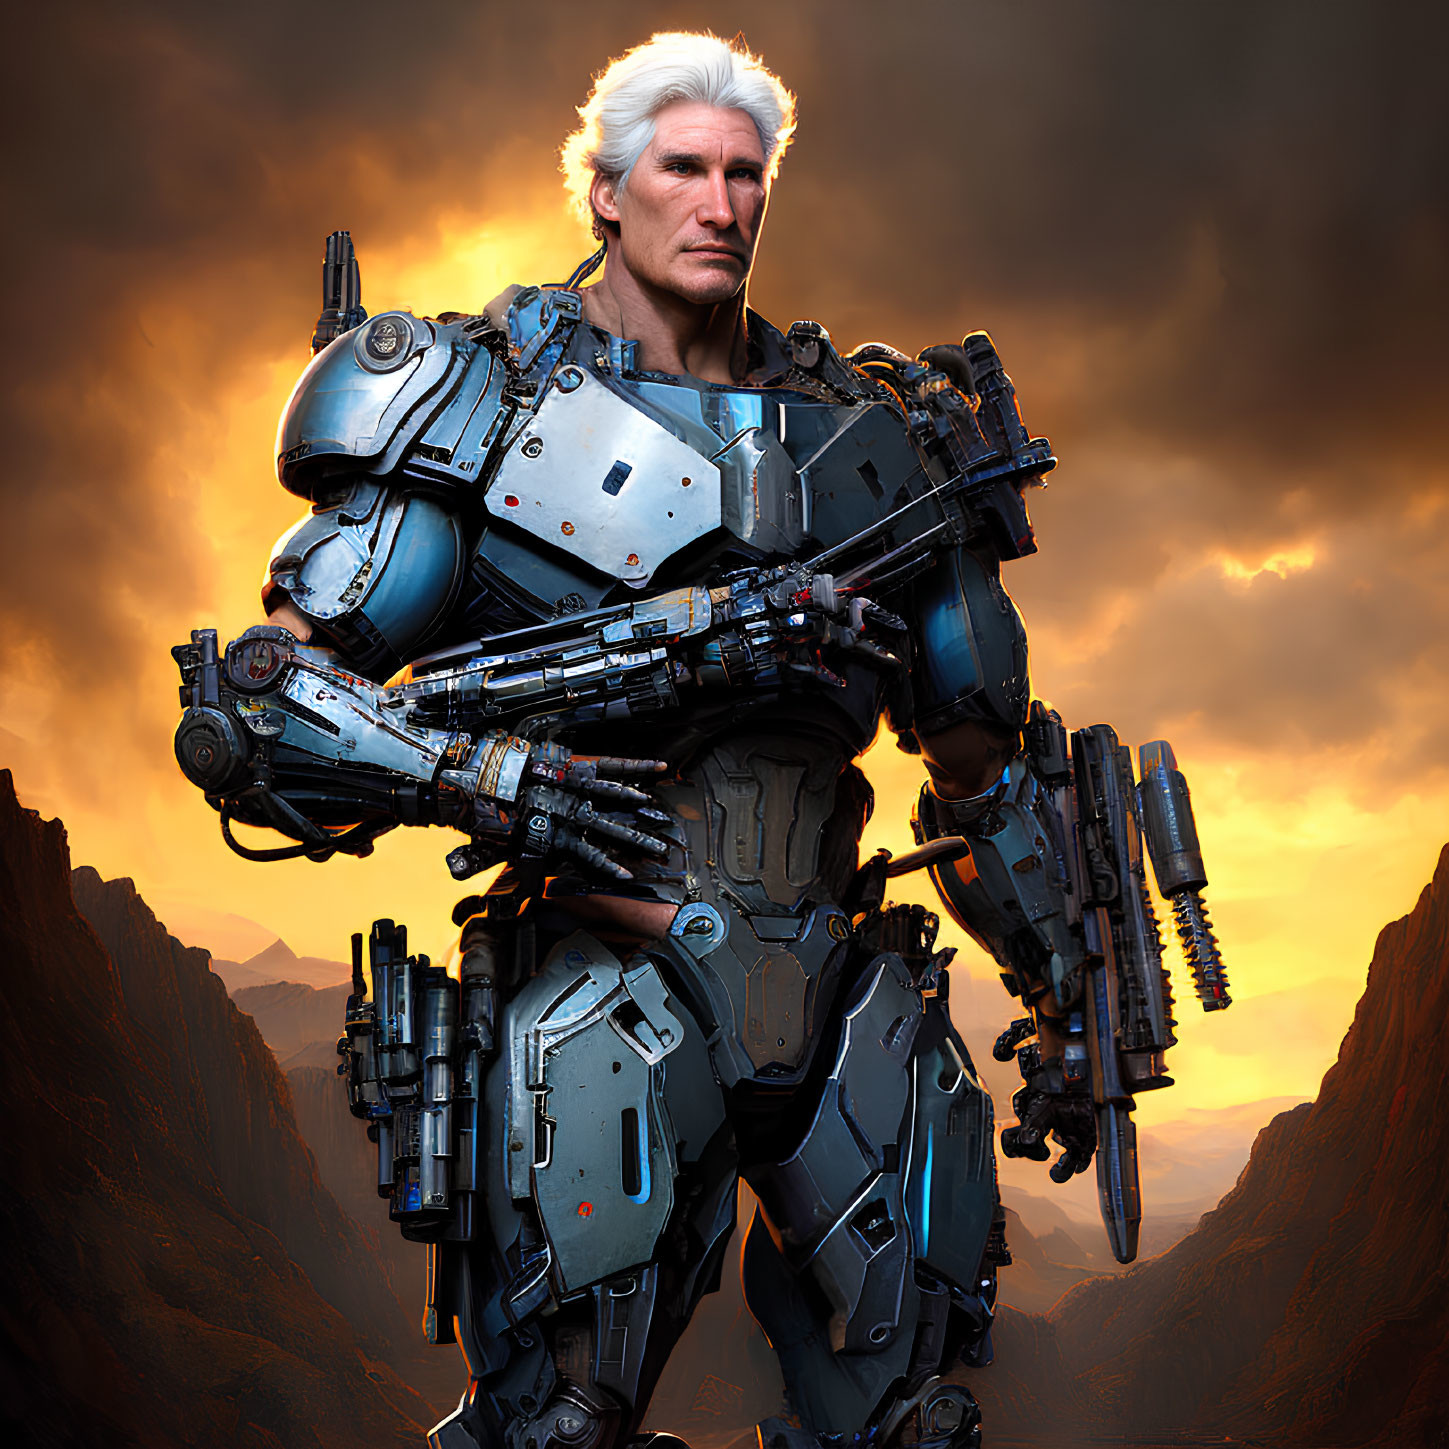 Silver-haired man in advanced robotic exoskeleton at sunset mountains.